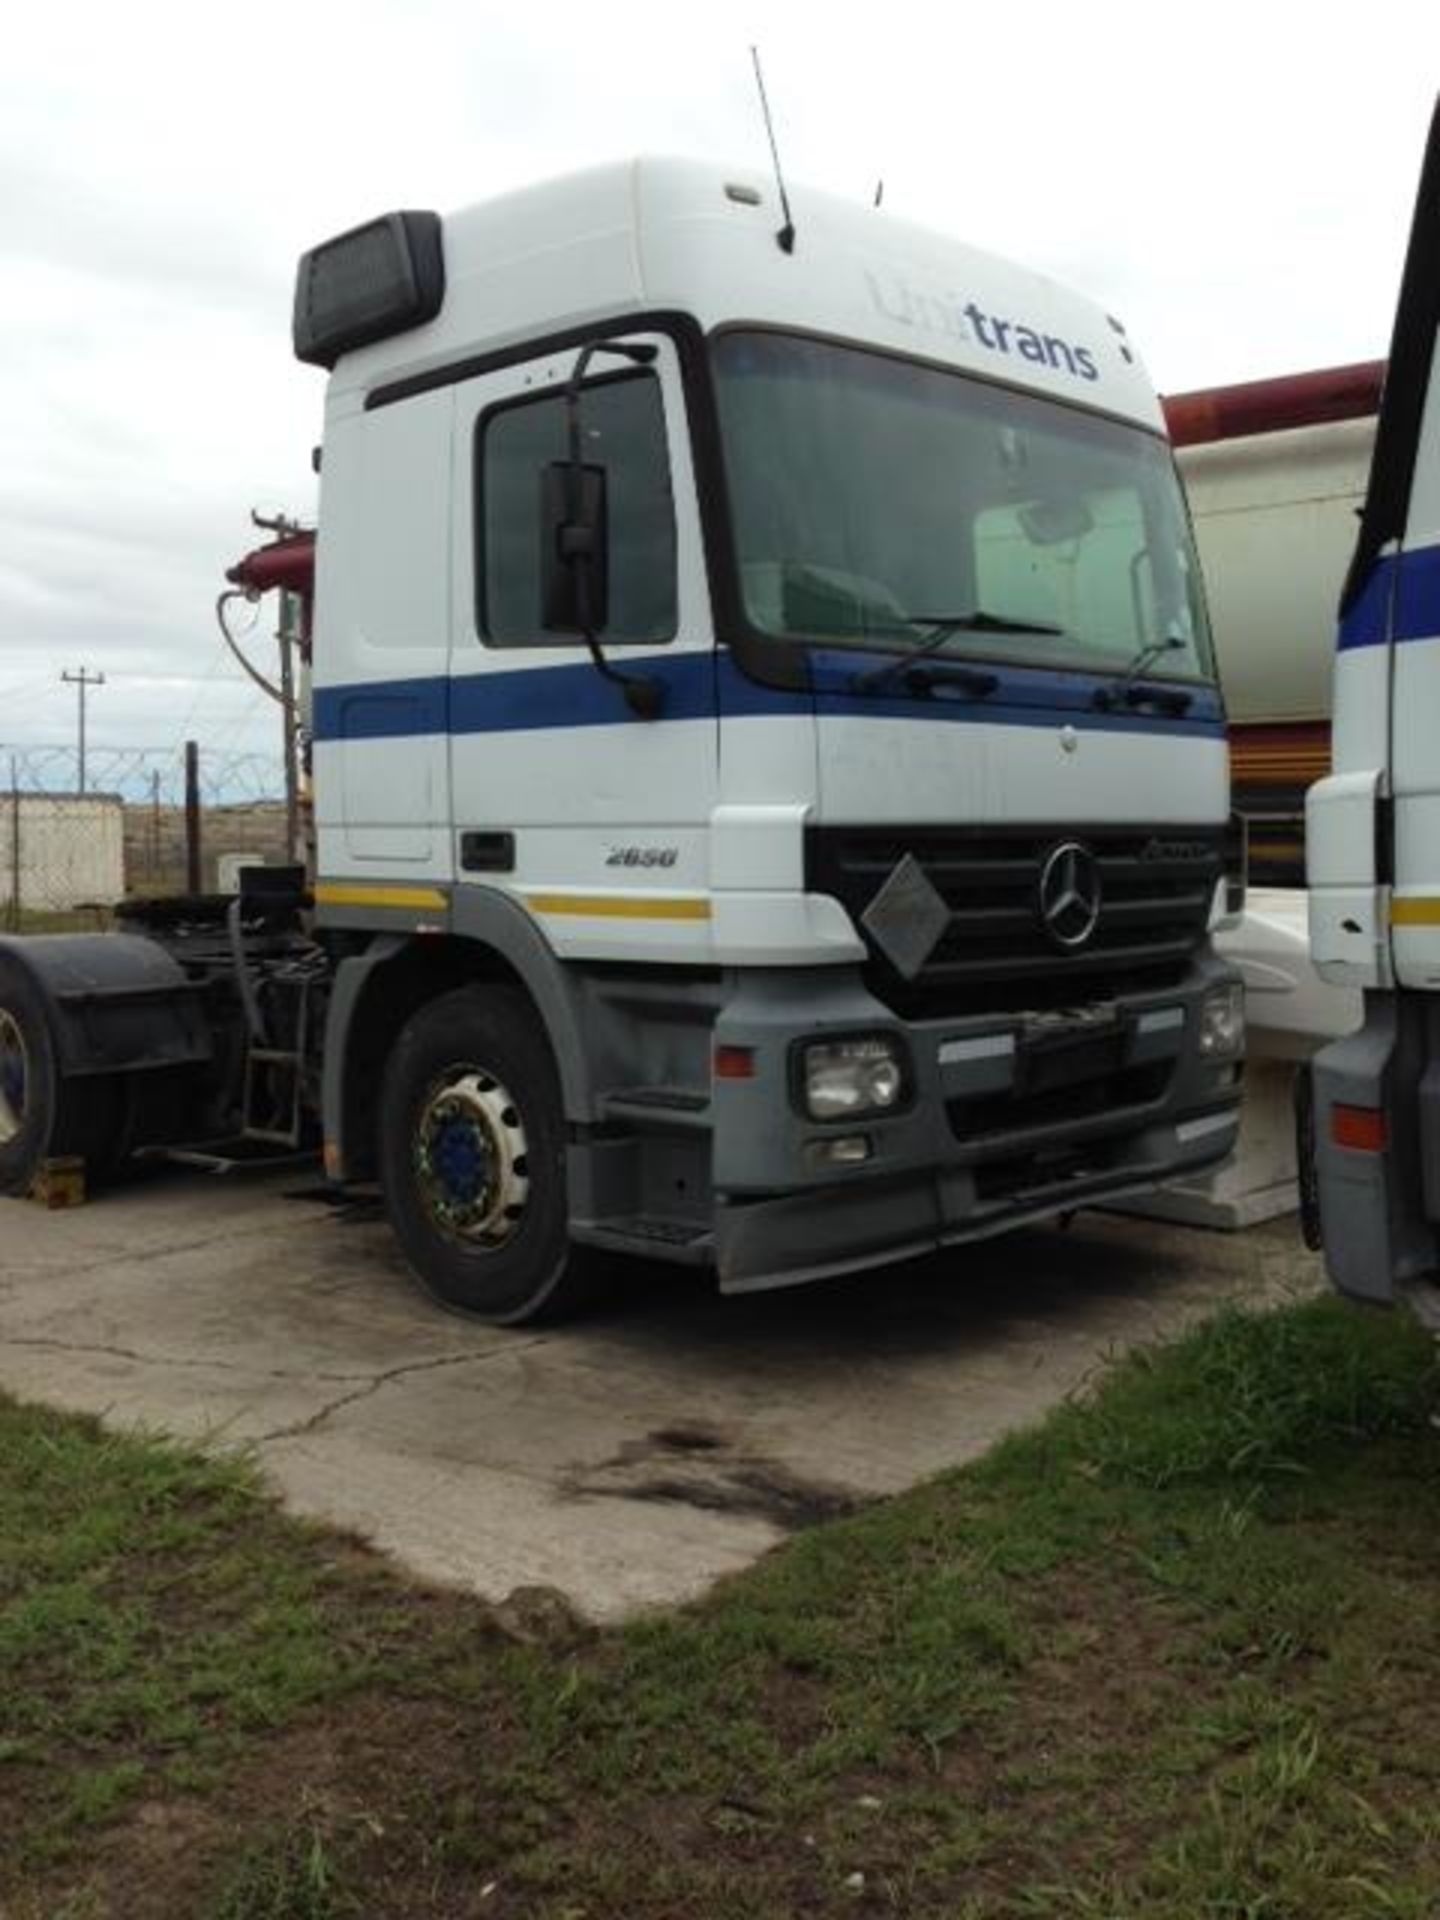 2007 M/BENZ ACTROS 2650 6X4 T/T (NON RUNNER) - (DB01VNGP) - (LOCATION: P.E)